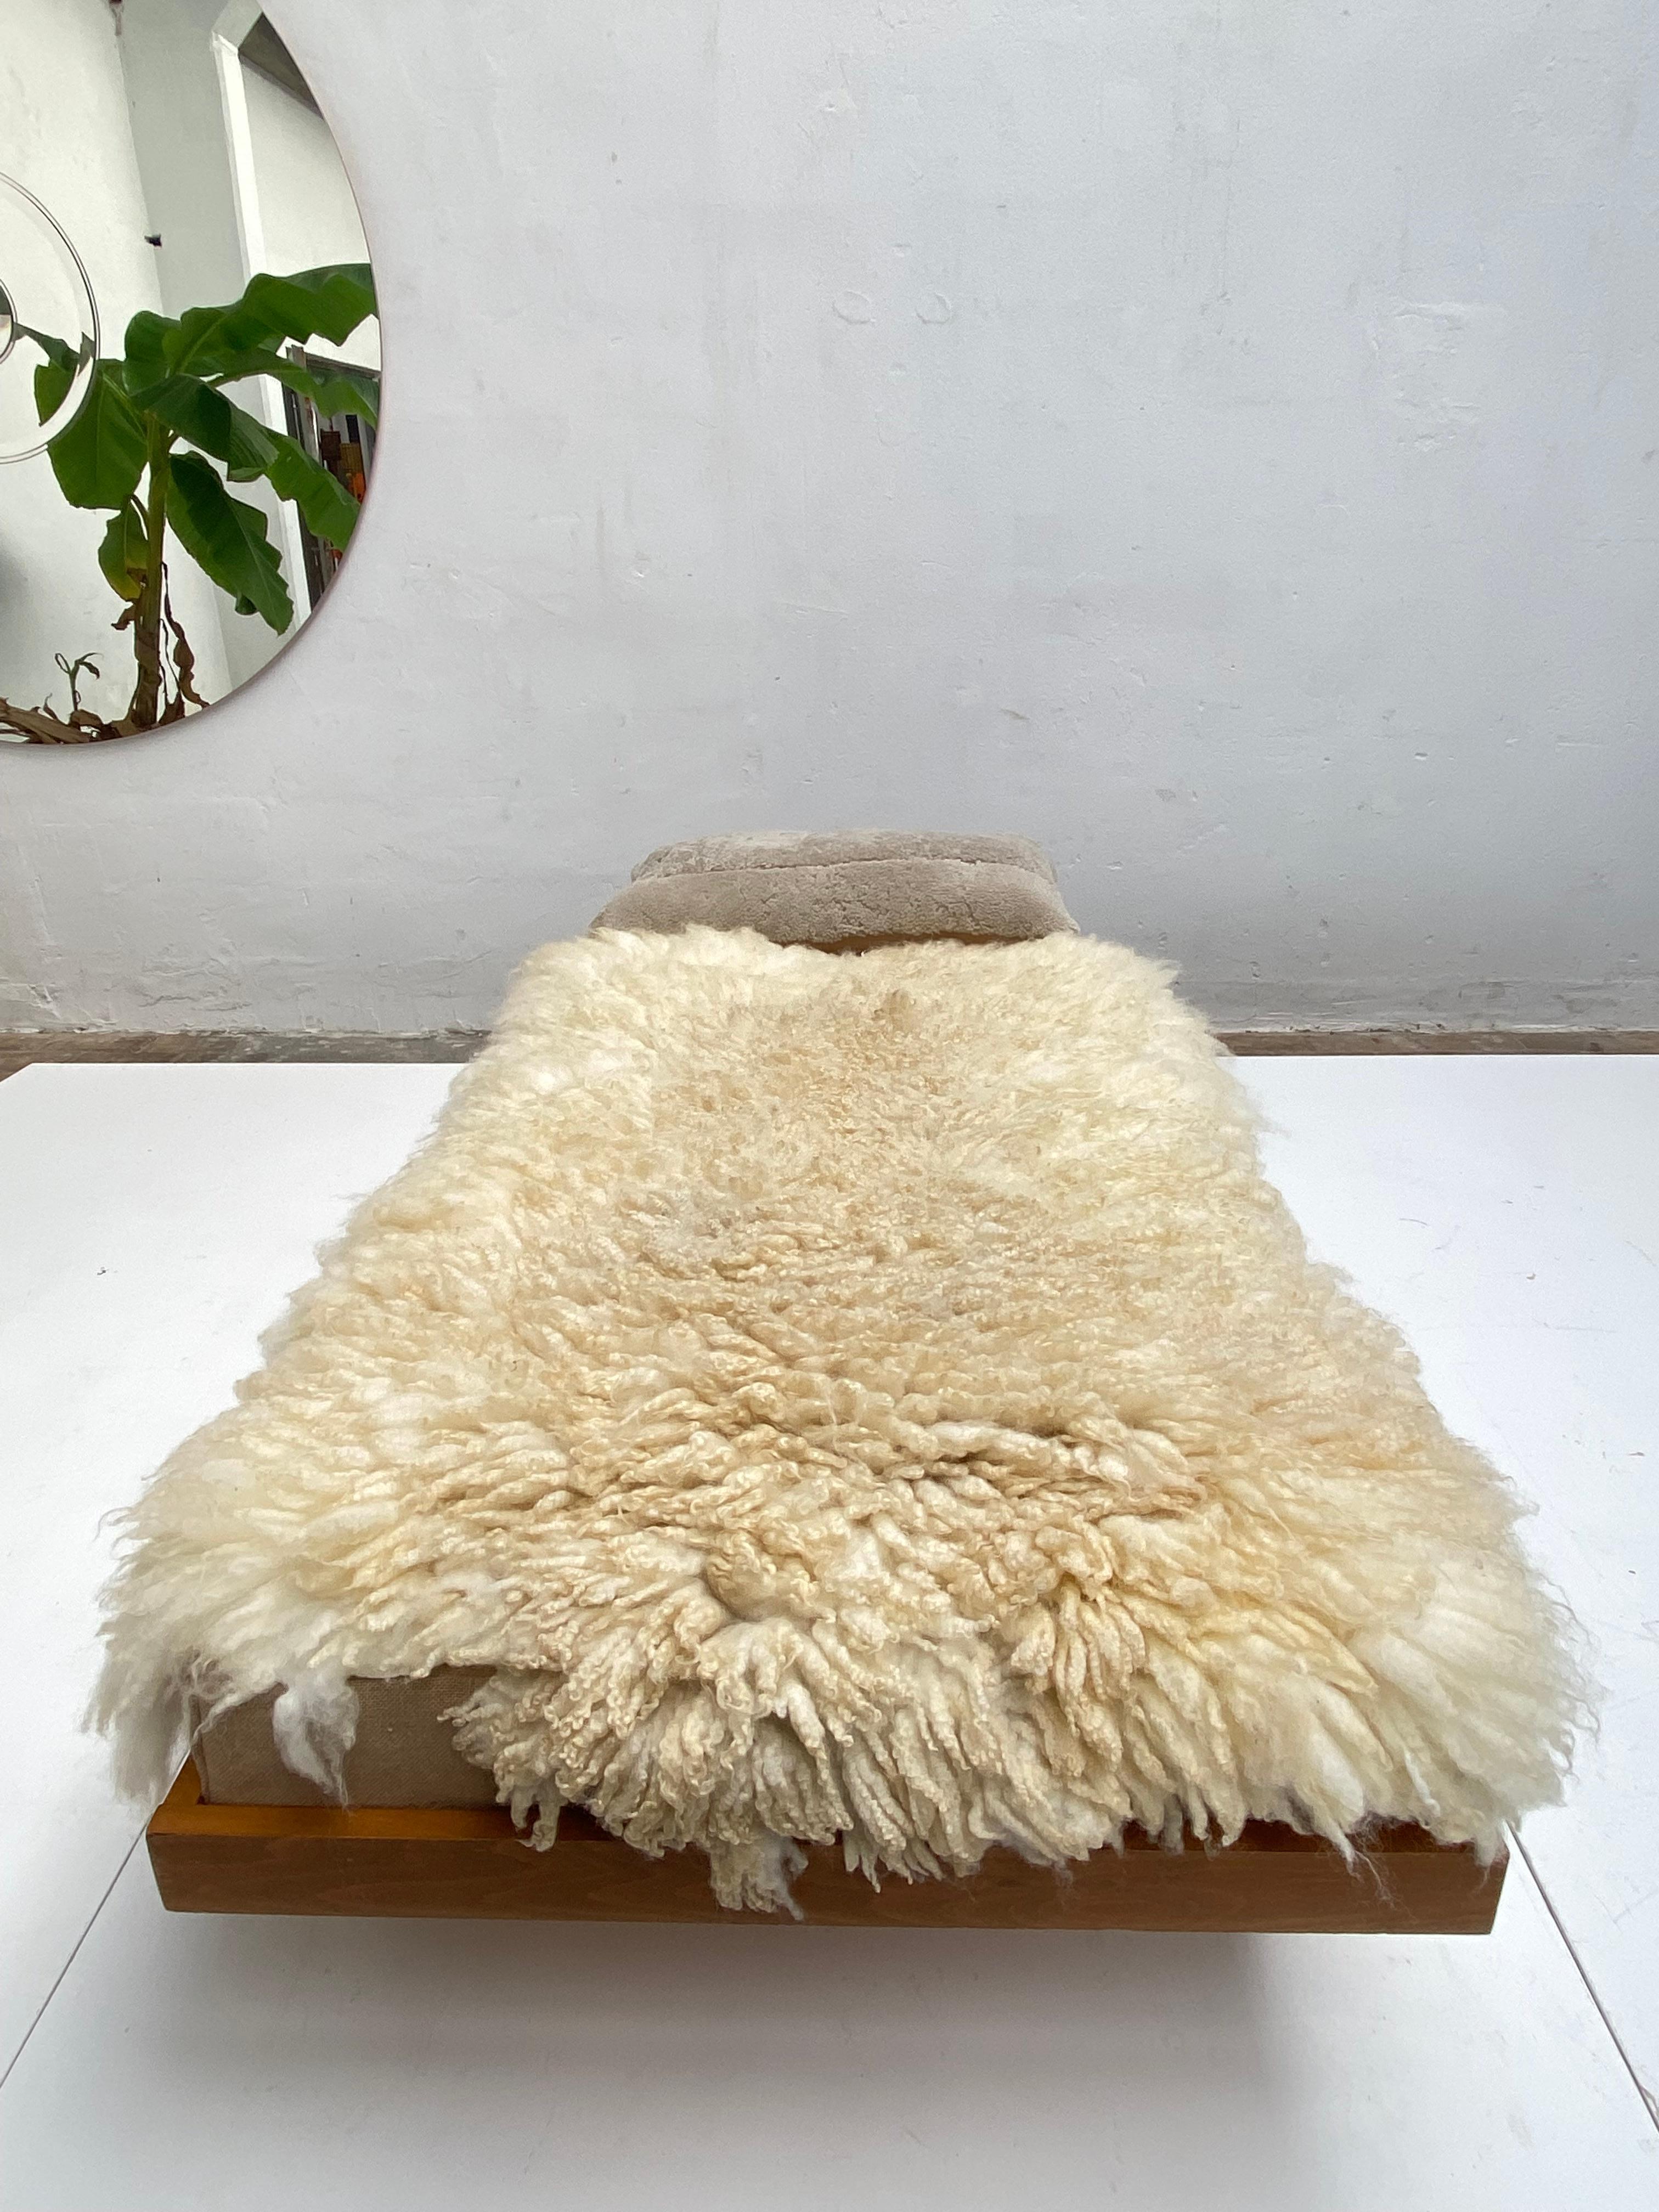 Mid-20th Century 1950's Danish Teak Daybed with Felted Wensleydale Texel Sheep Wool & Raw Cotton